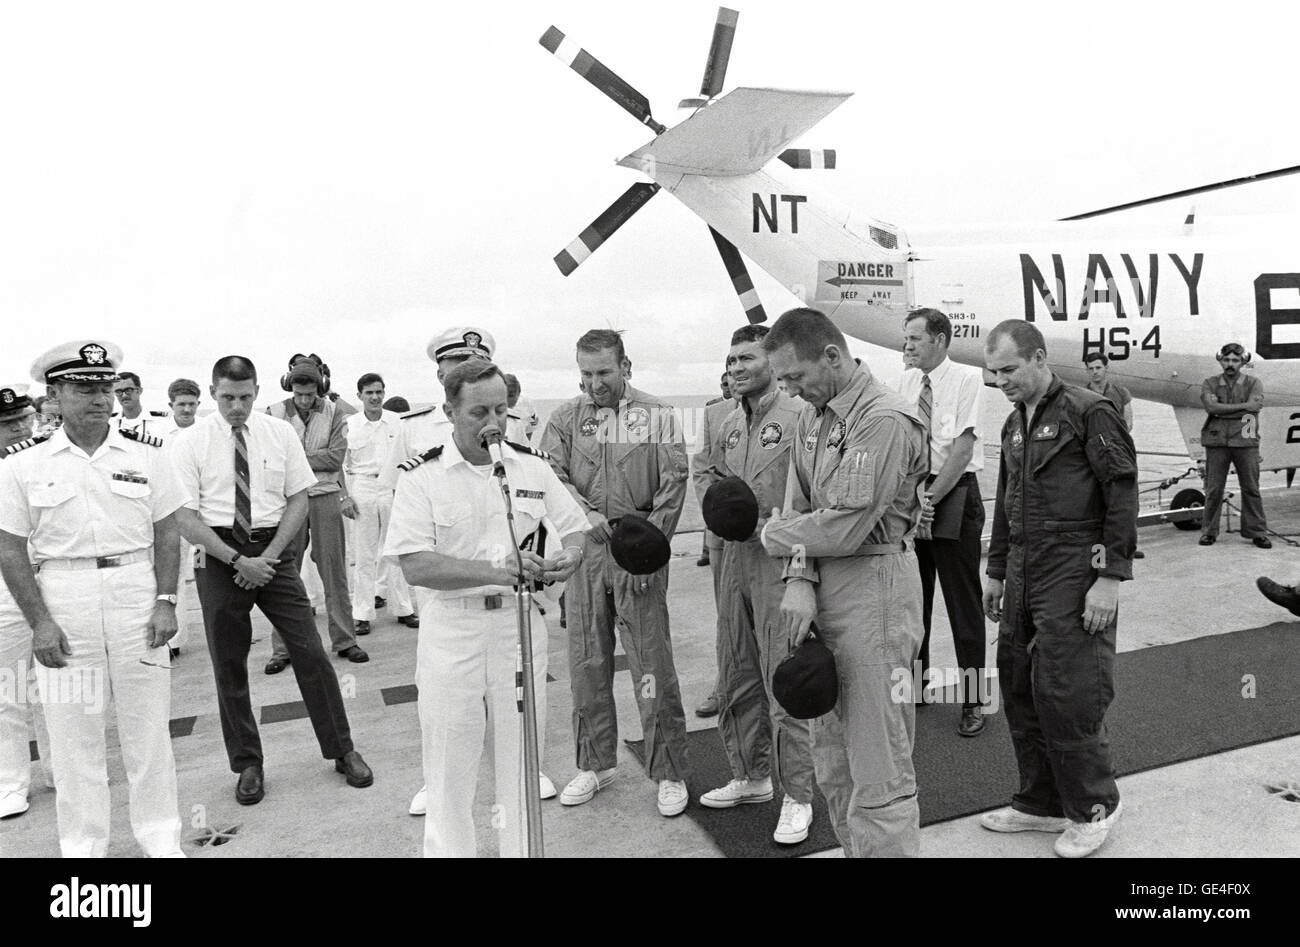 Commander Philip Eldredge Jerauld (at microphone), ship's chaplain for U.S.S. Iwo Jima, offers a prayer of thanks for the safe return of the Apollo 13 crew members soon after they arrived aboard the recovery ship. Standing in the center of the picture, from the left, are astronauts James A. Lovell Jr., Commander; Fred W. Haise Jr., Lunar Module Pilot; and John L. Swigert Jr., Command Module Pilot. The Apollo 13 Command Module &quot;Odyssey&quot; splashed down at 12:07:44 p.m. (CST), April 17, 1970, to conclude safely a perilous space flight. The three astronauts were picked up by helicopter an Stock Photo